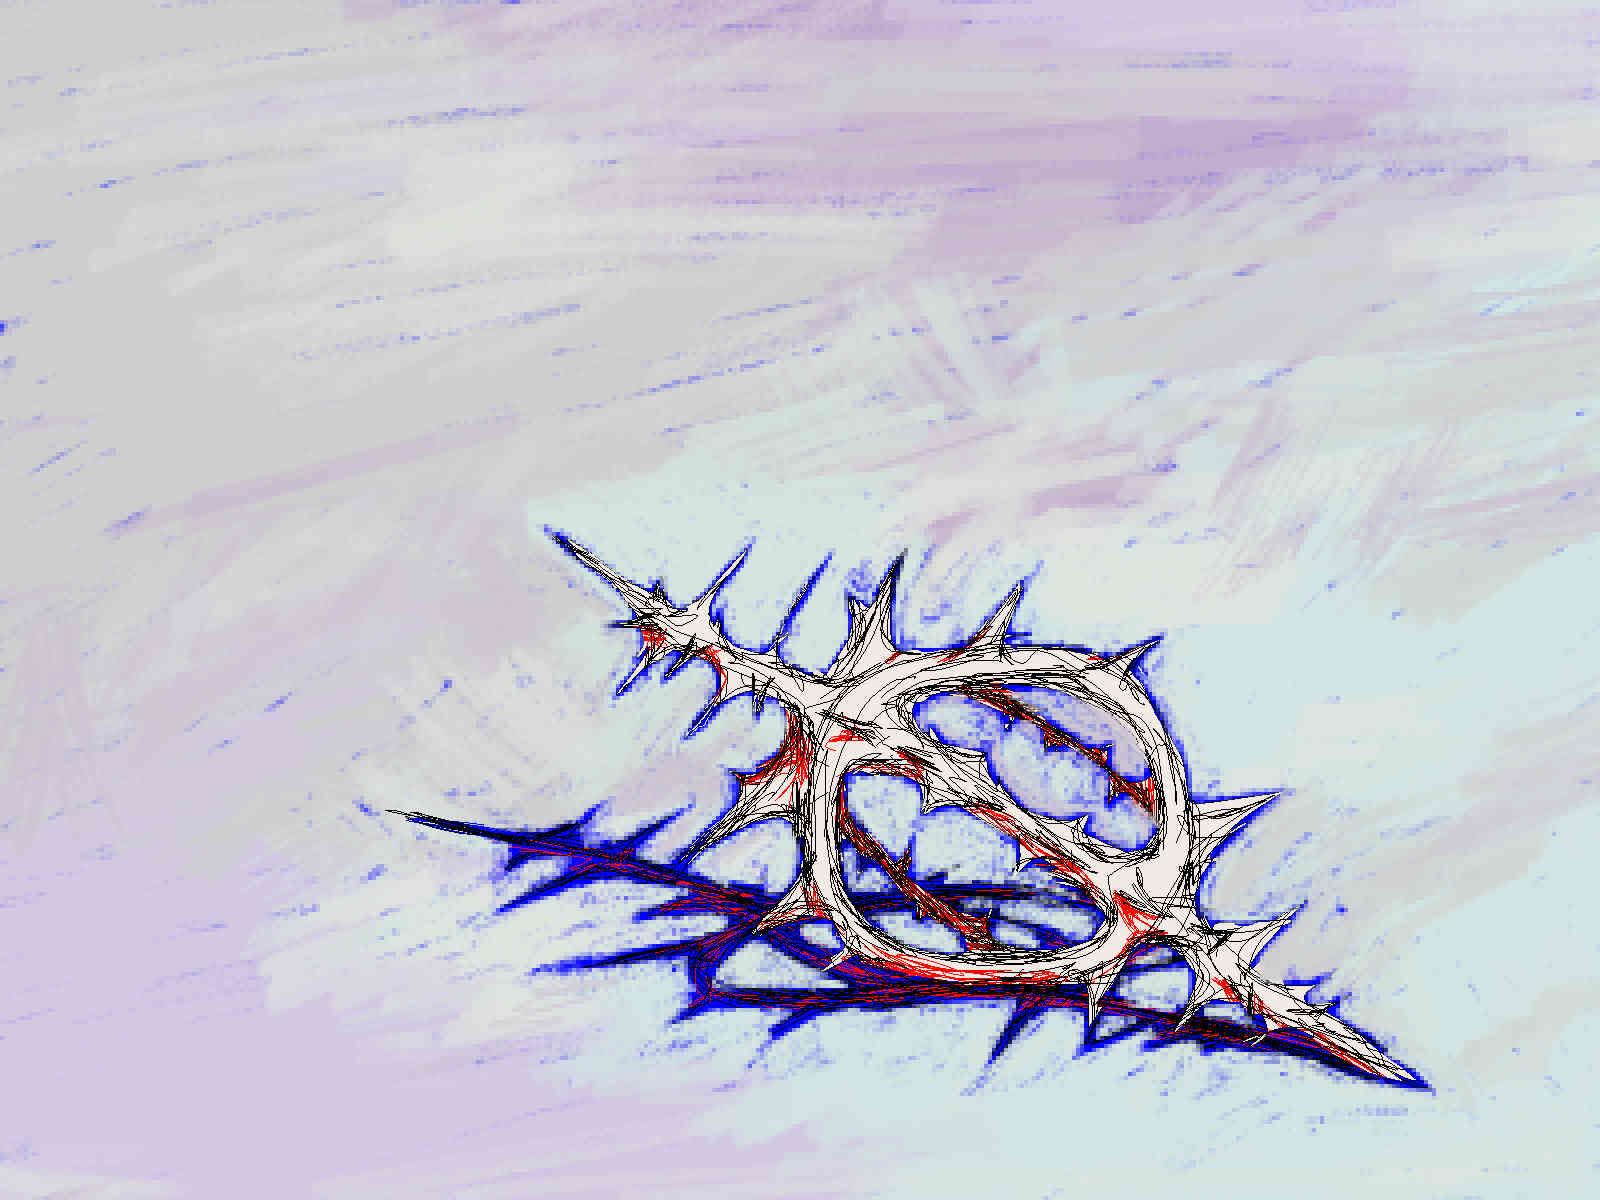 digital drawing. a messily scribbled radiolarian skeleton resting at an angle against a pale background